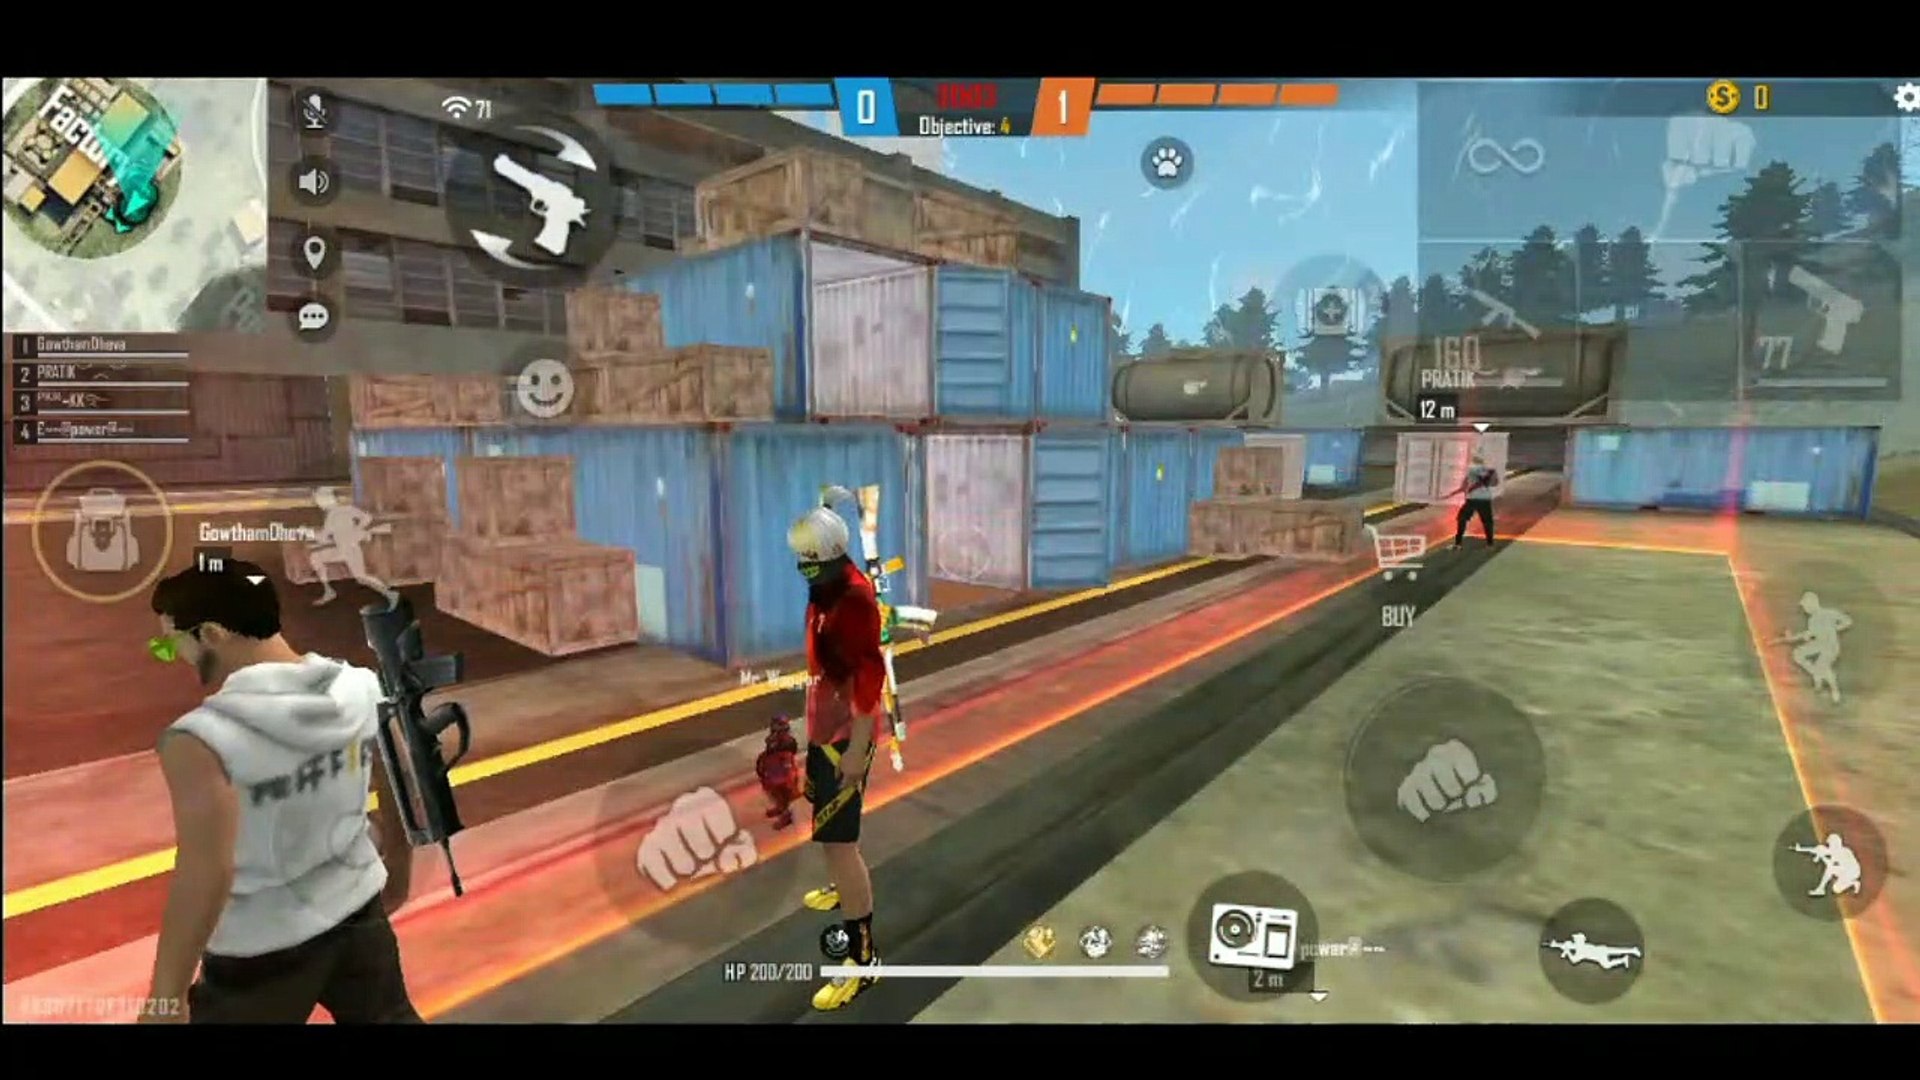 HACKER IN CLASH SQUAD RANK FREE FIRE, SPEED MOVEMENT HACKED